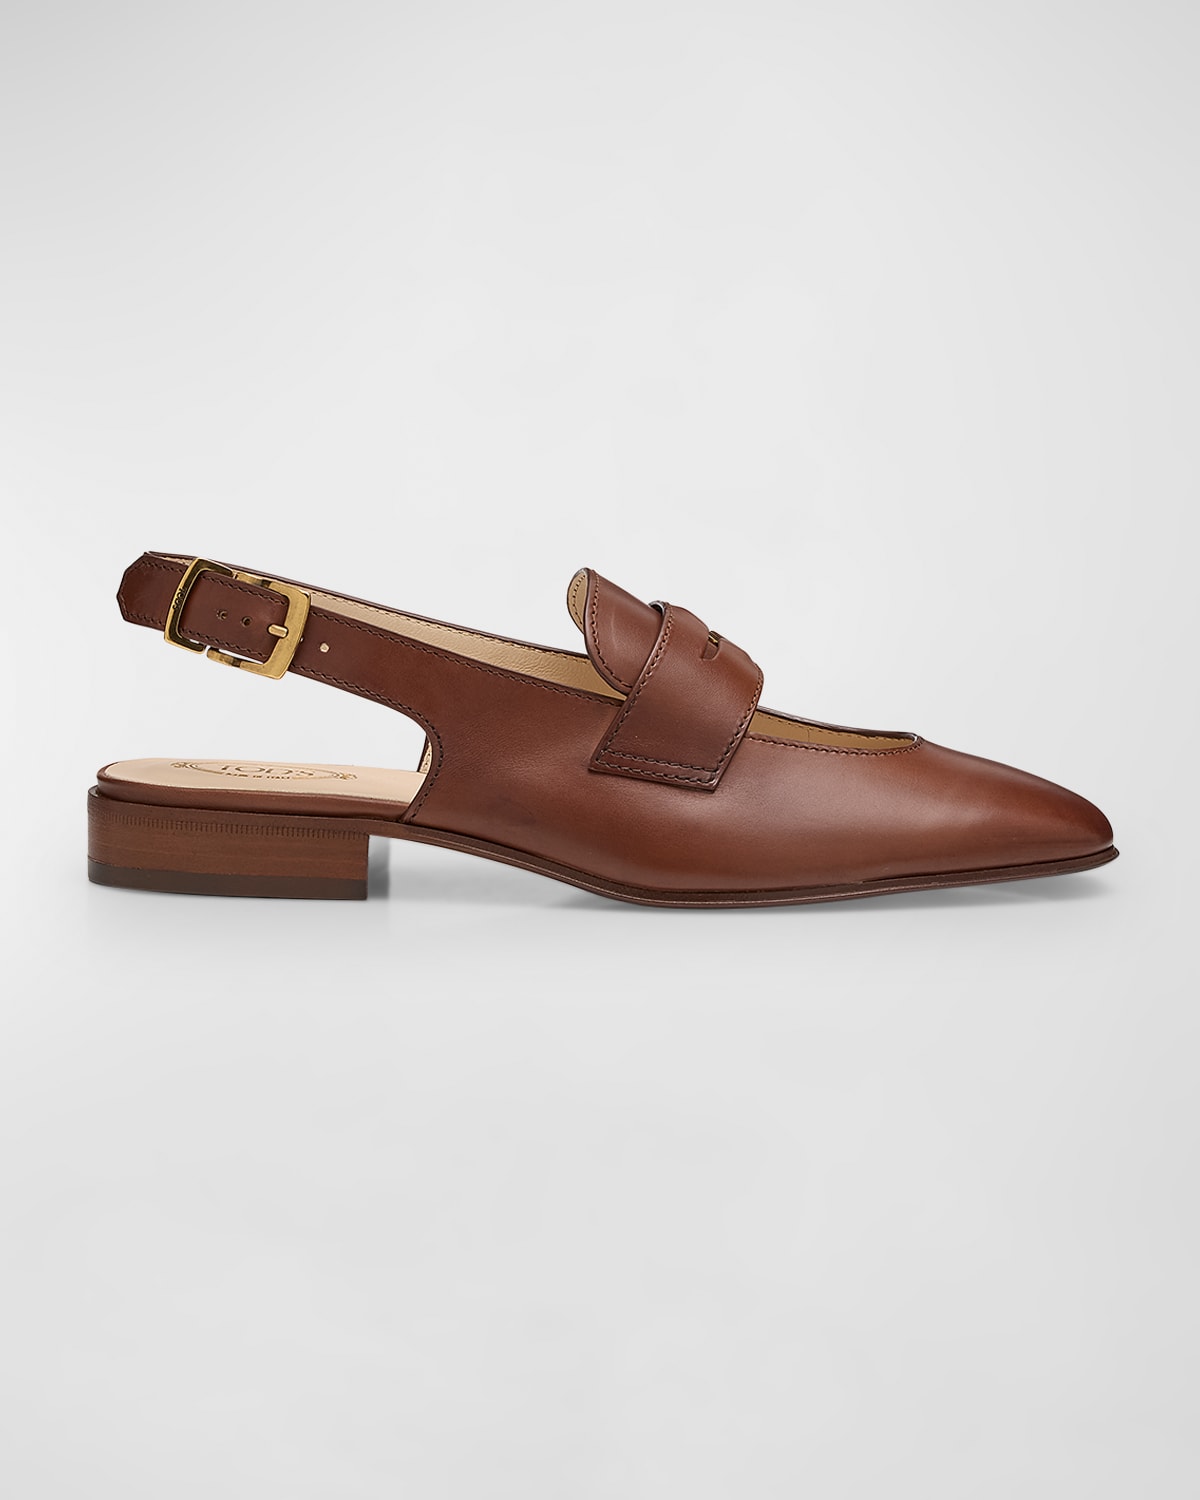 TOD'S LEATHER SLINGBACK BALLERINA PENNY LOAFERS